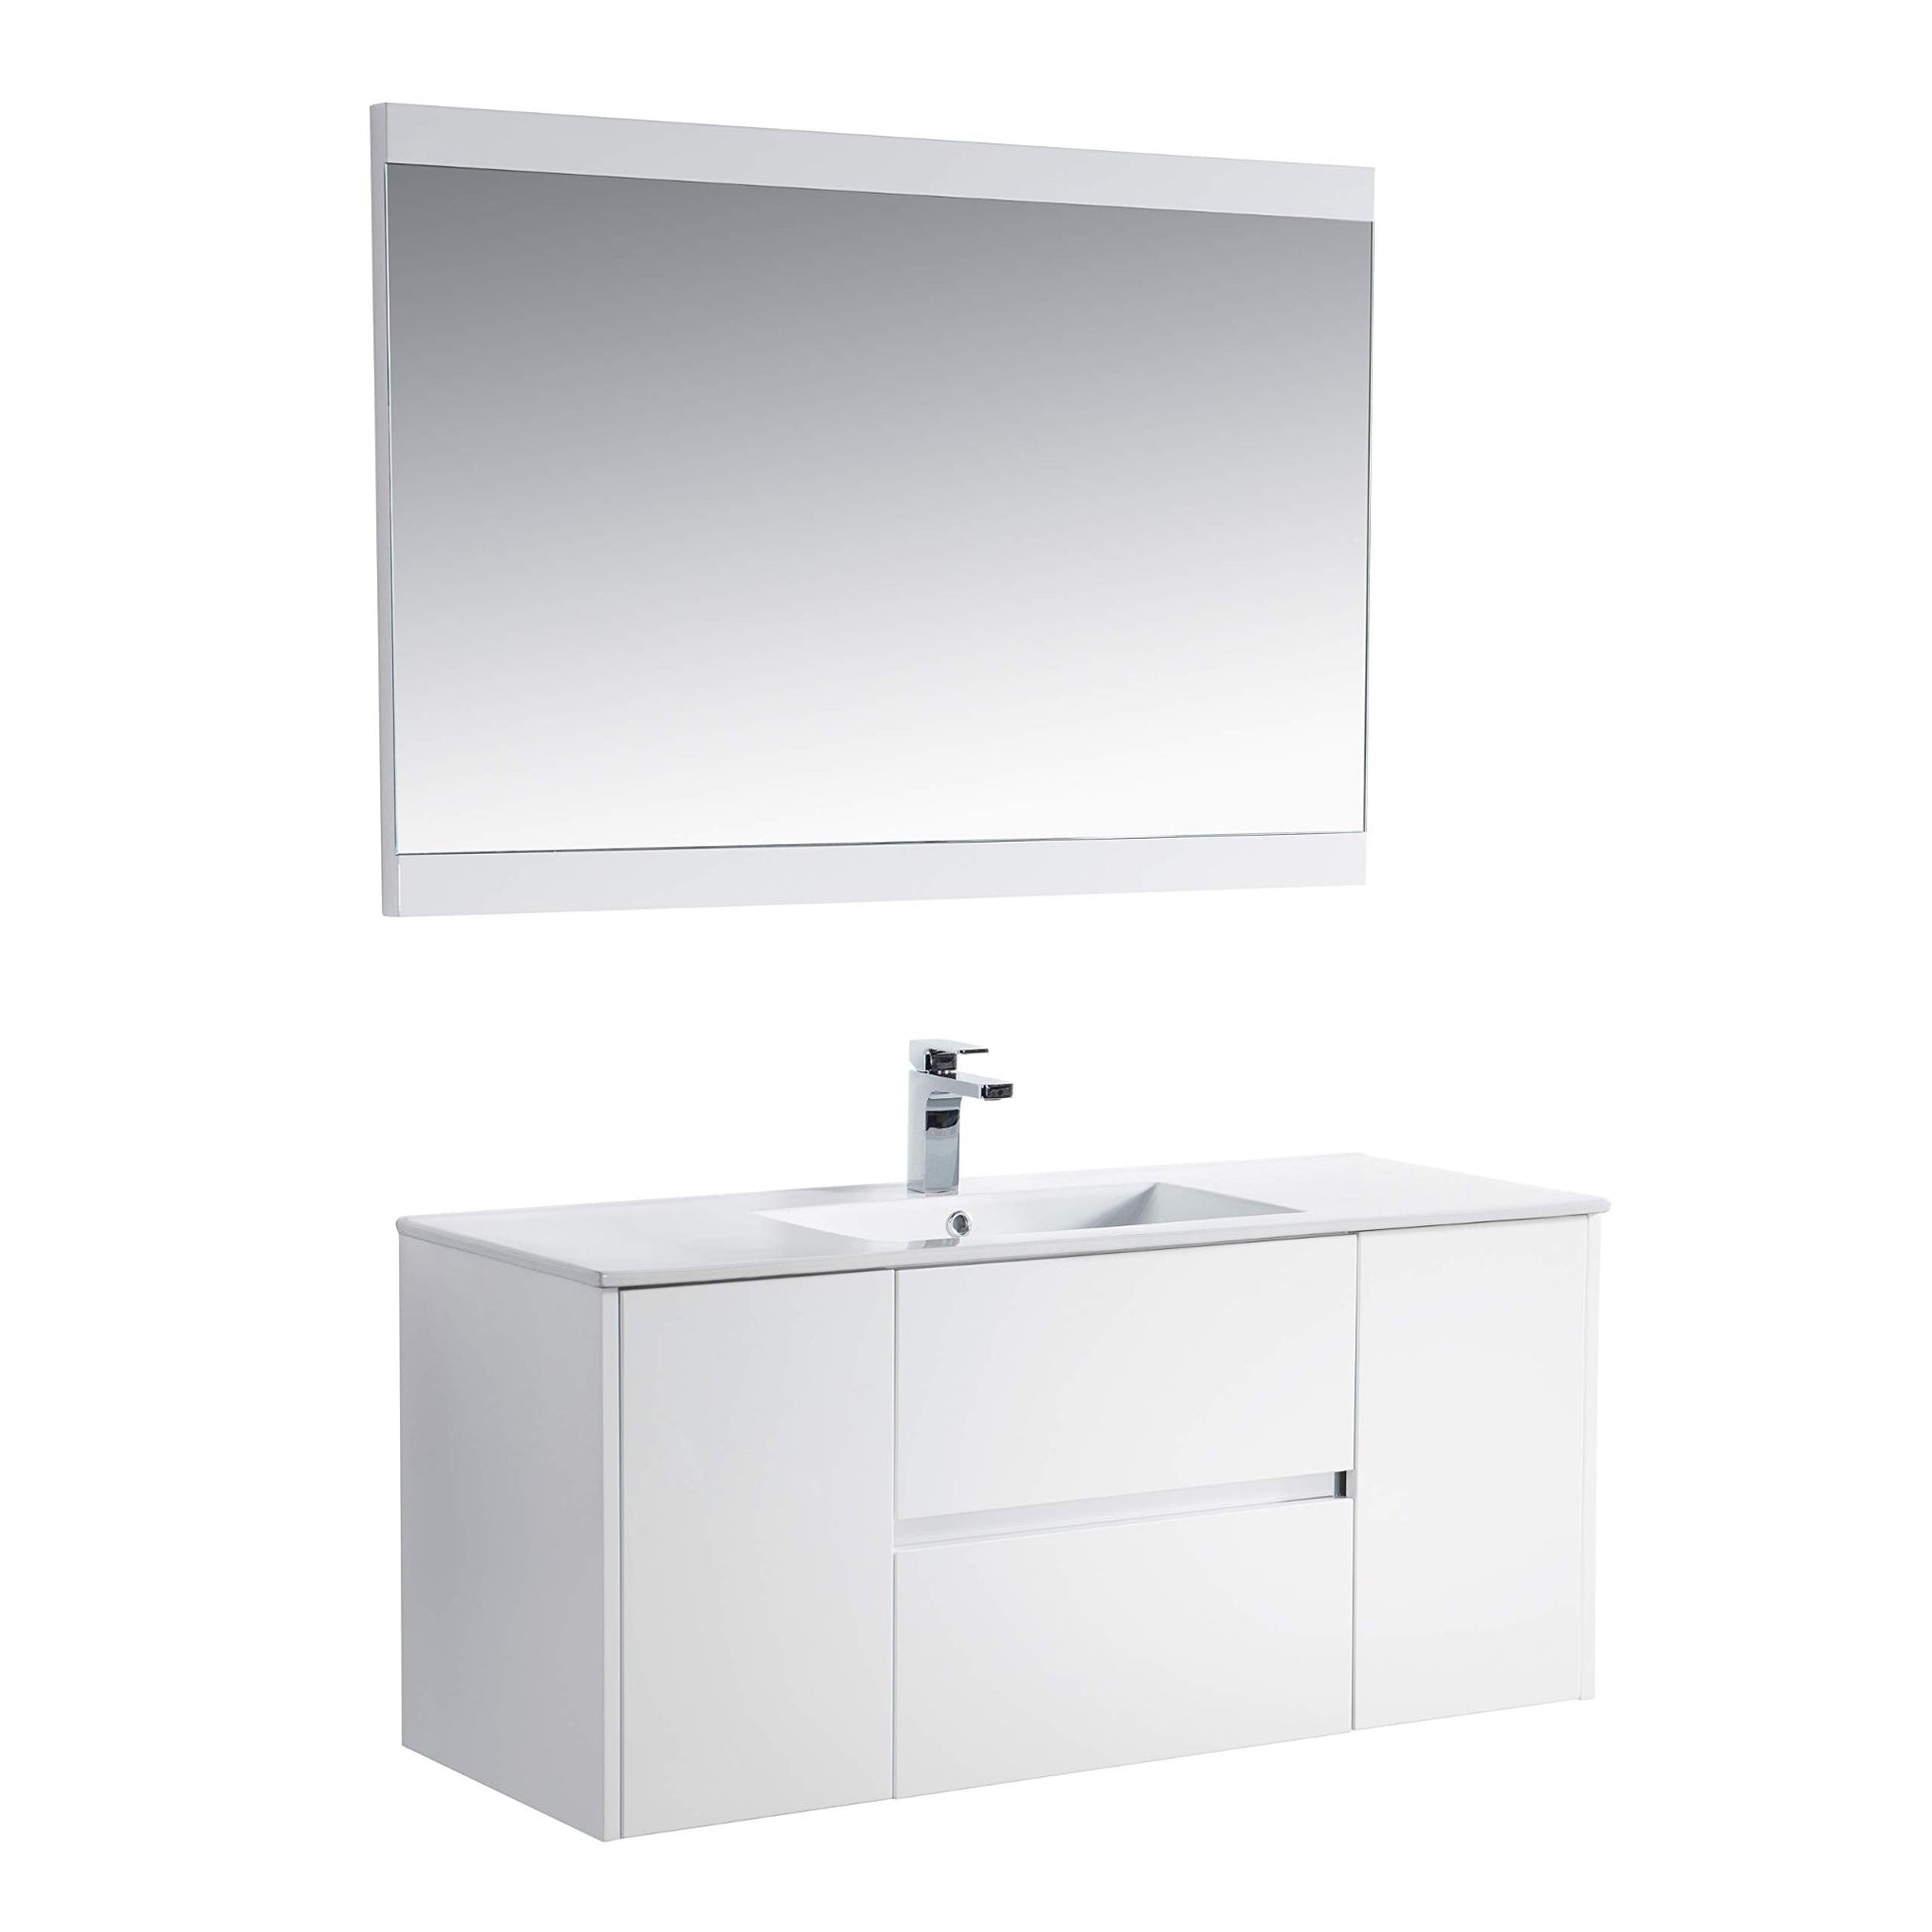 Blossom Valencia 48" 2-Door 2-Drawer White Wall-Mounted Vanity Set With Ceramic Top, Integrated Single Sink and Mirror